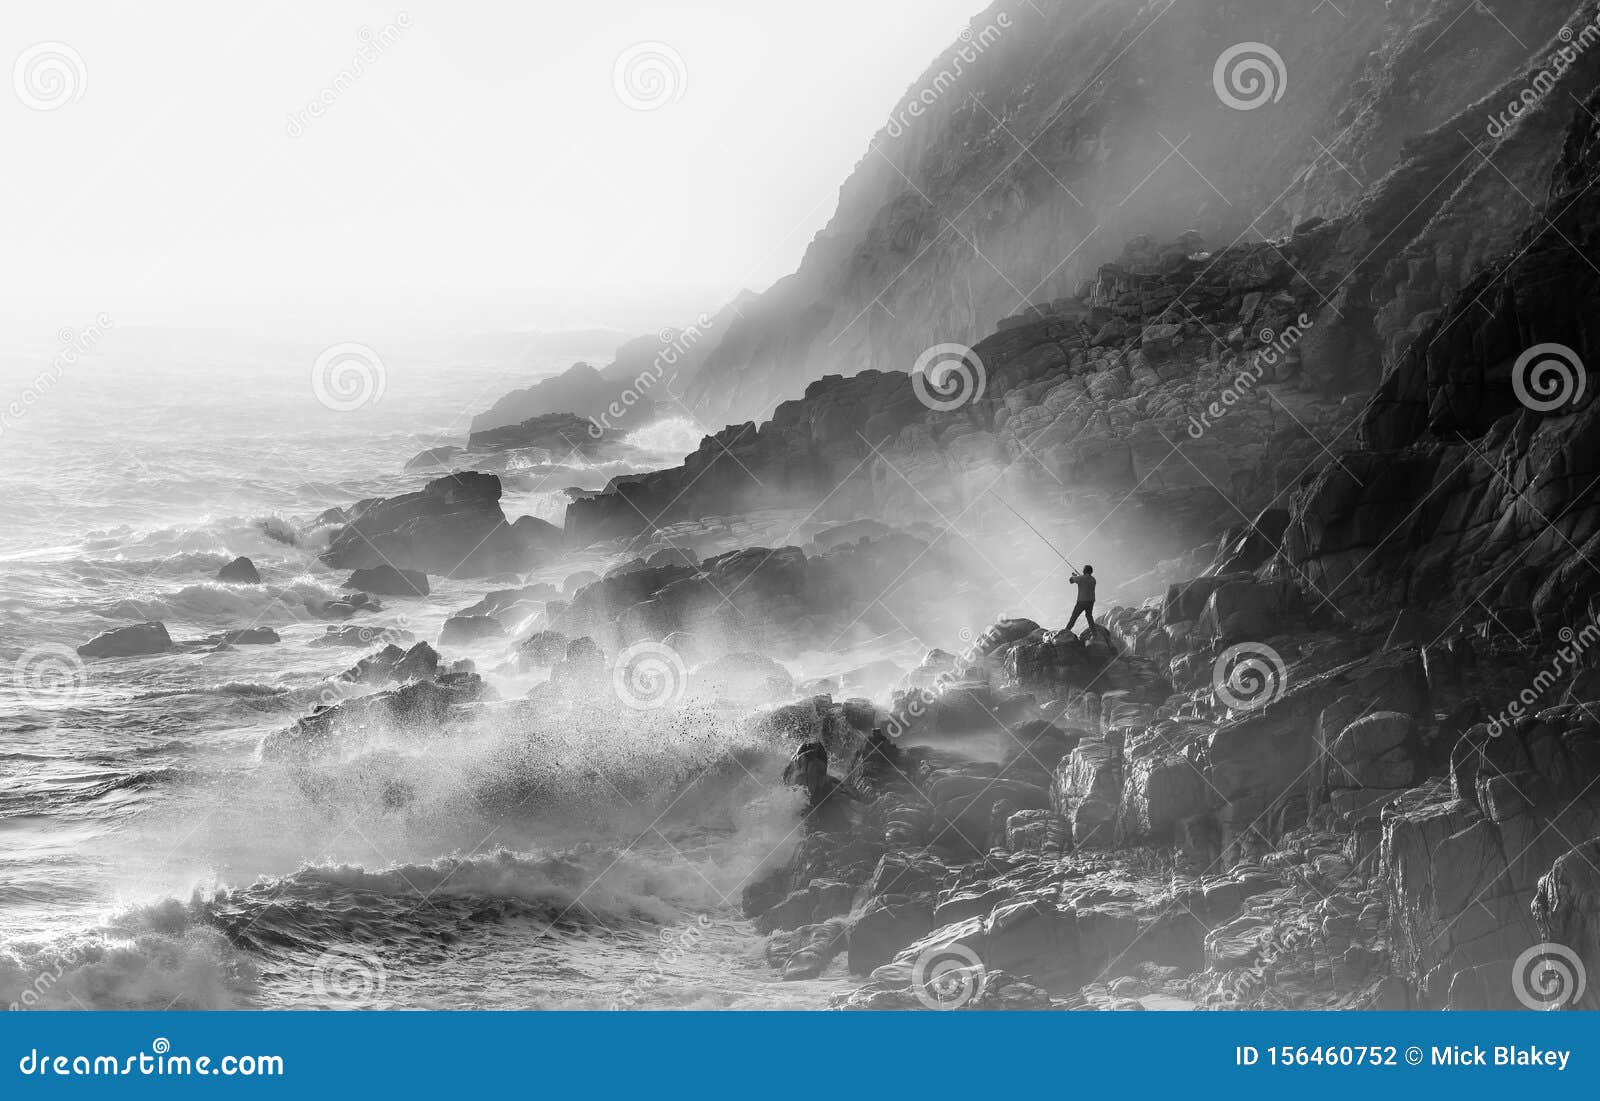 extreme crazy fishing in stormy conditions at porth nanven in cornwall. waves and sea spray backlit by sun